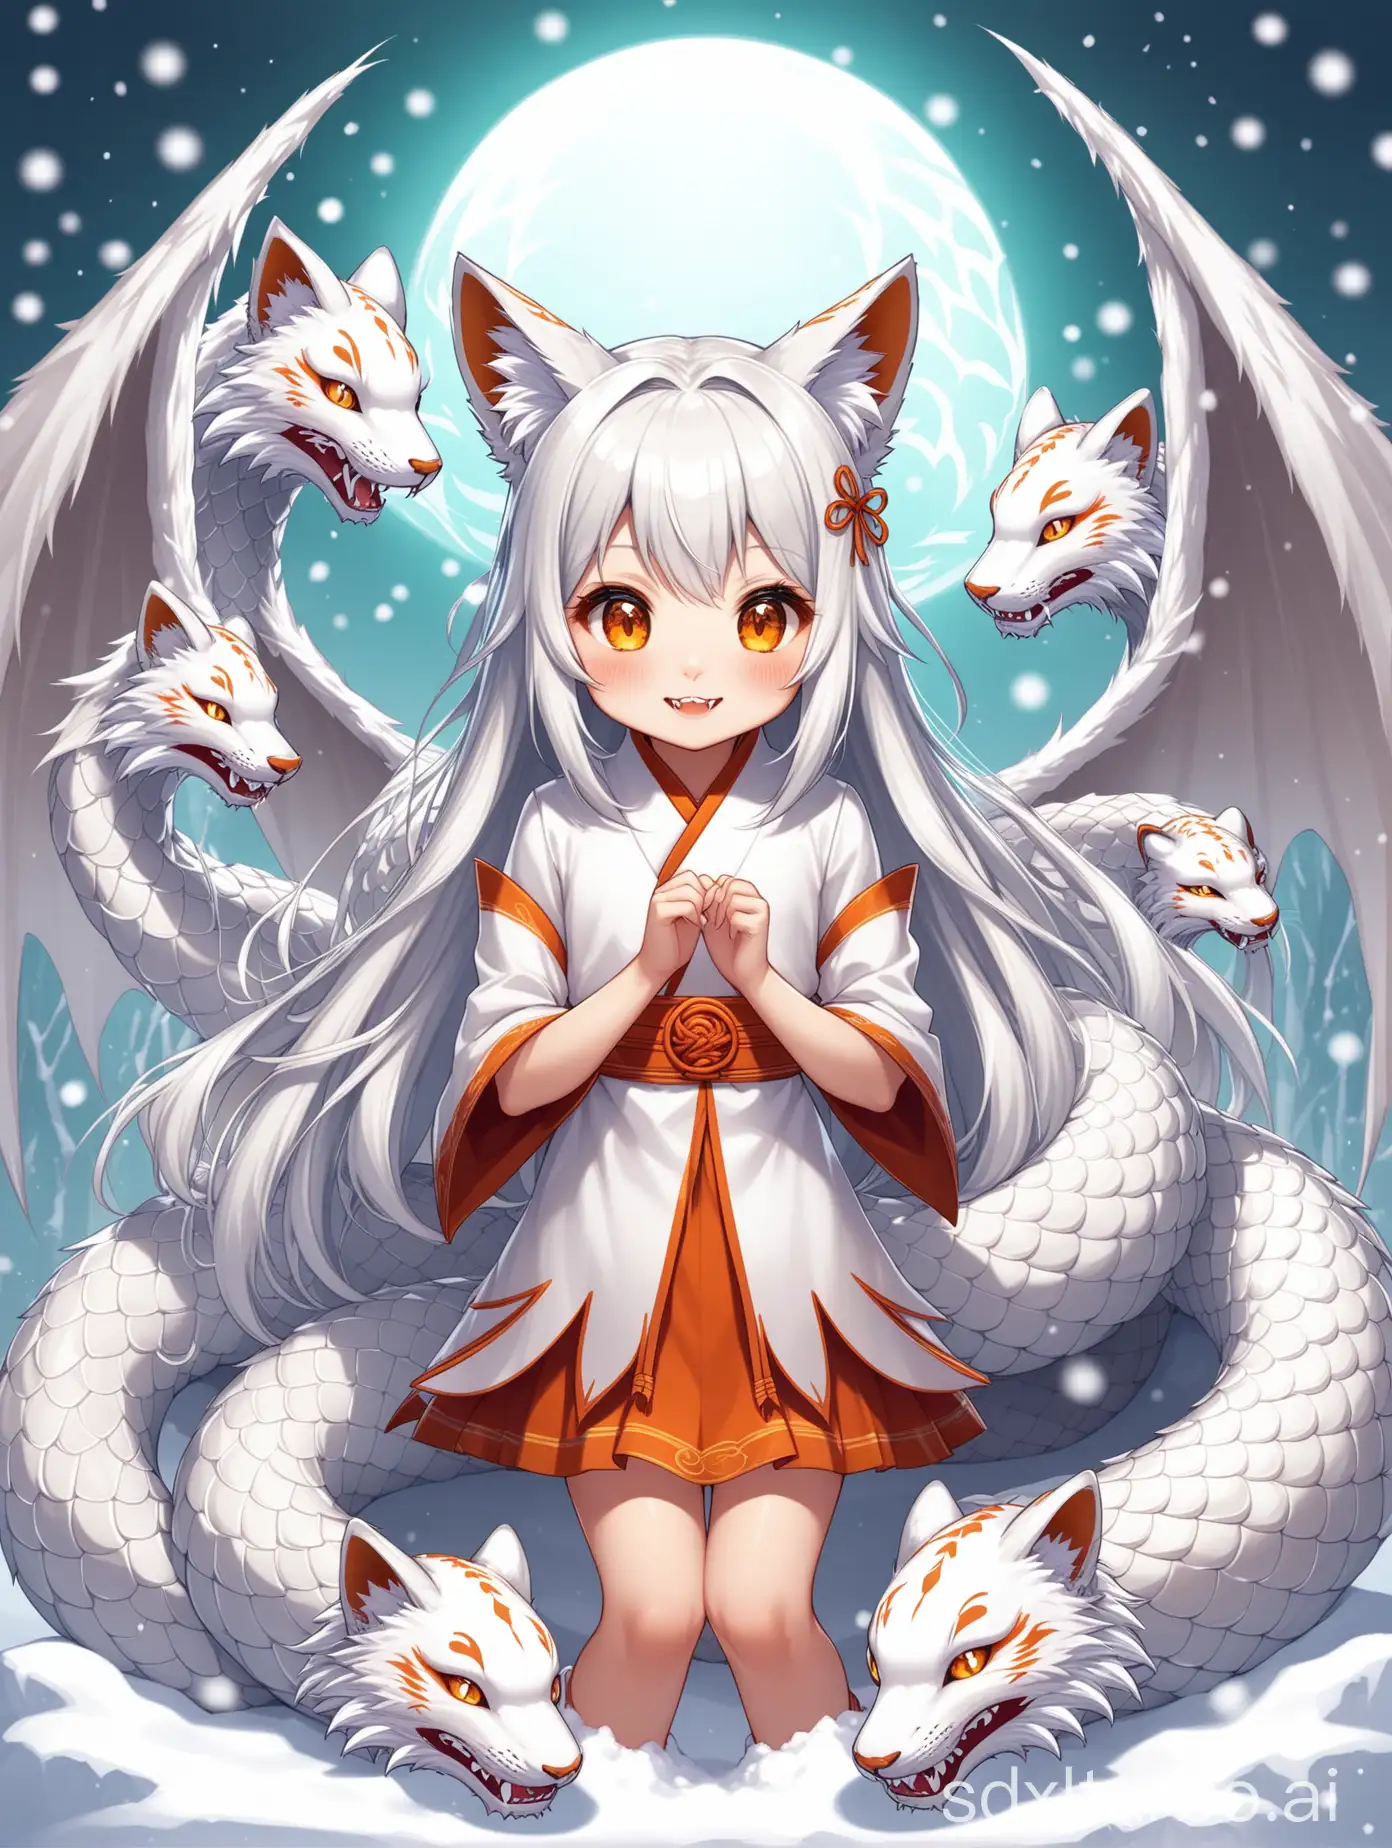 A nine-tailed fox with white tiger ears, dragon scales (less) claws, snow carving wings, snake teeth, cute little girl 9 years old and 5 heads